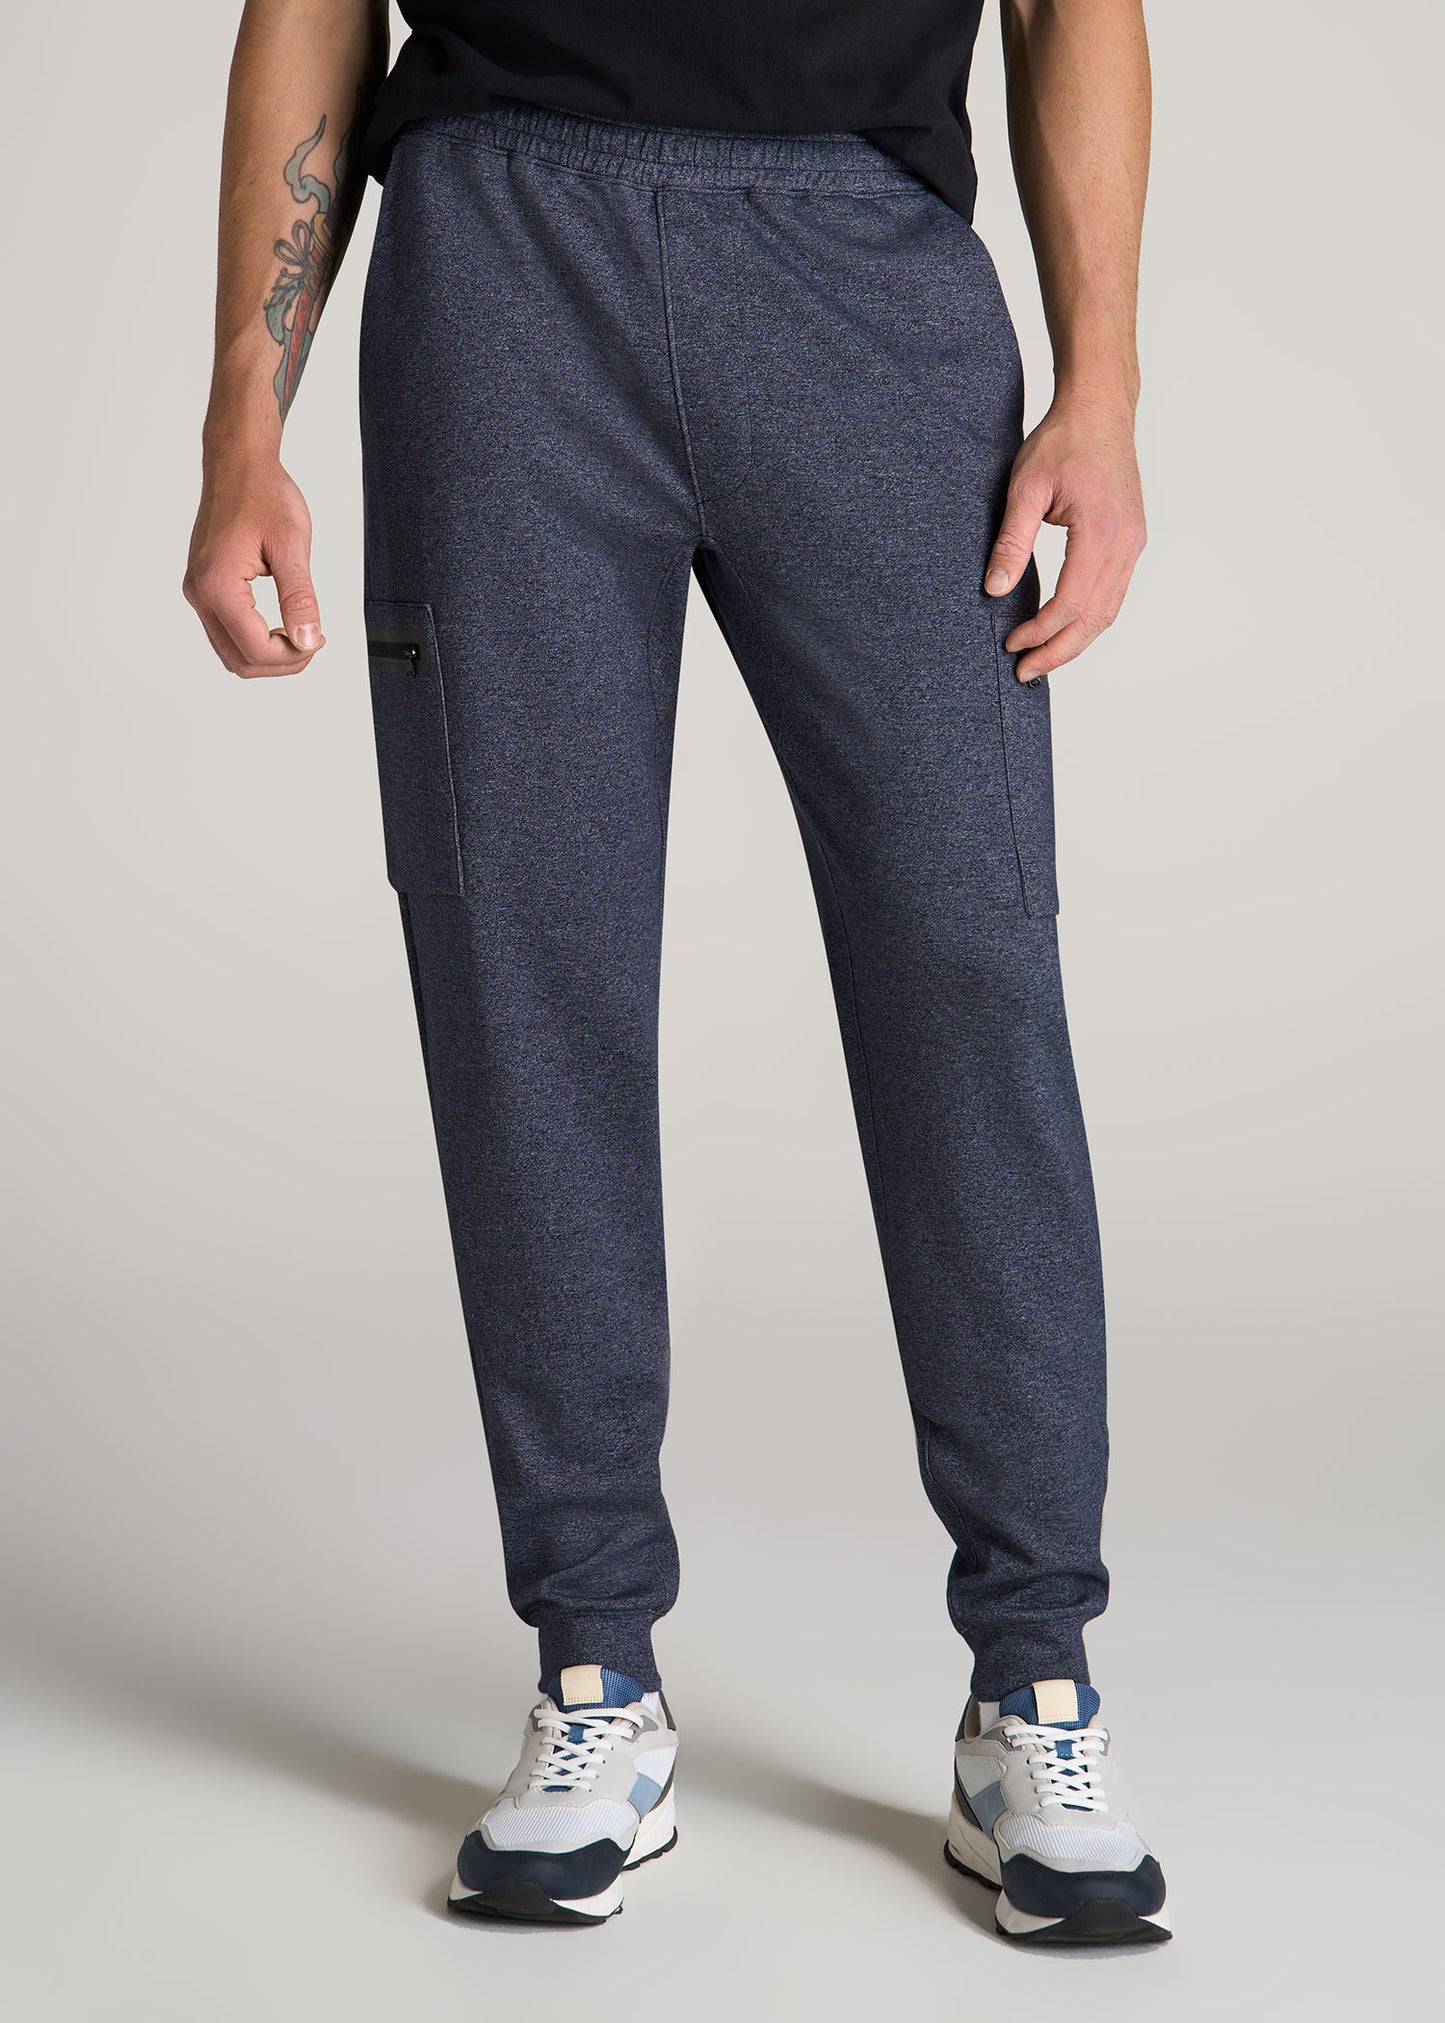 Men's Style Guide: What To Wear With Grey Sweatpants